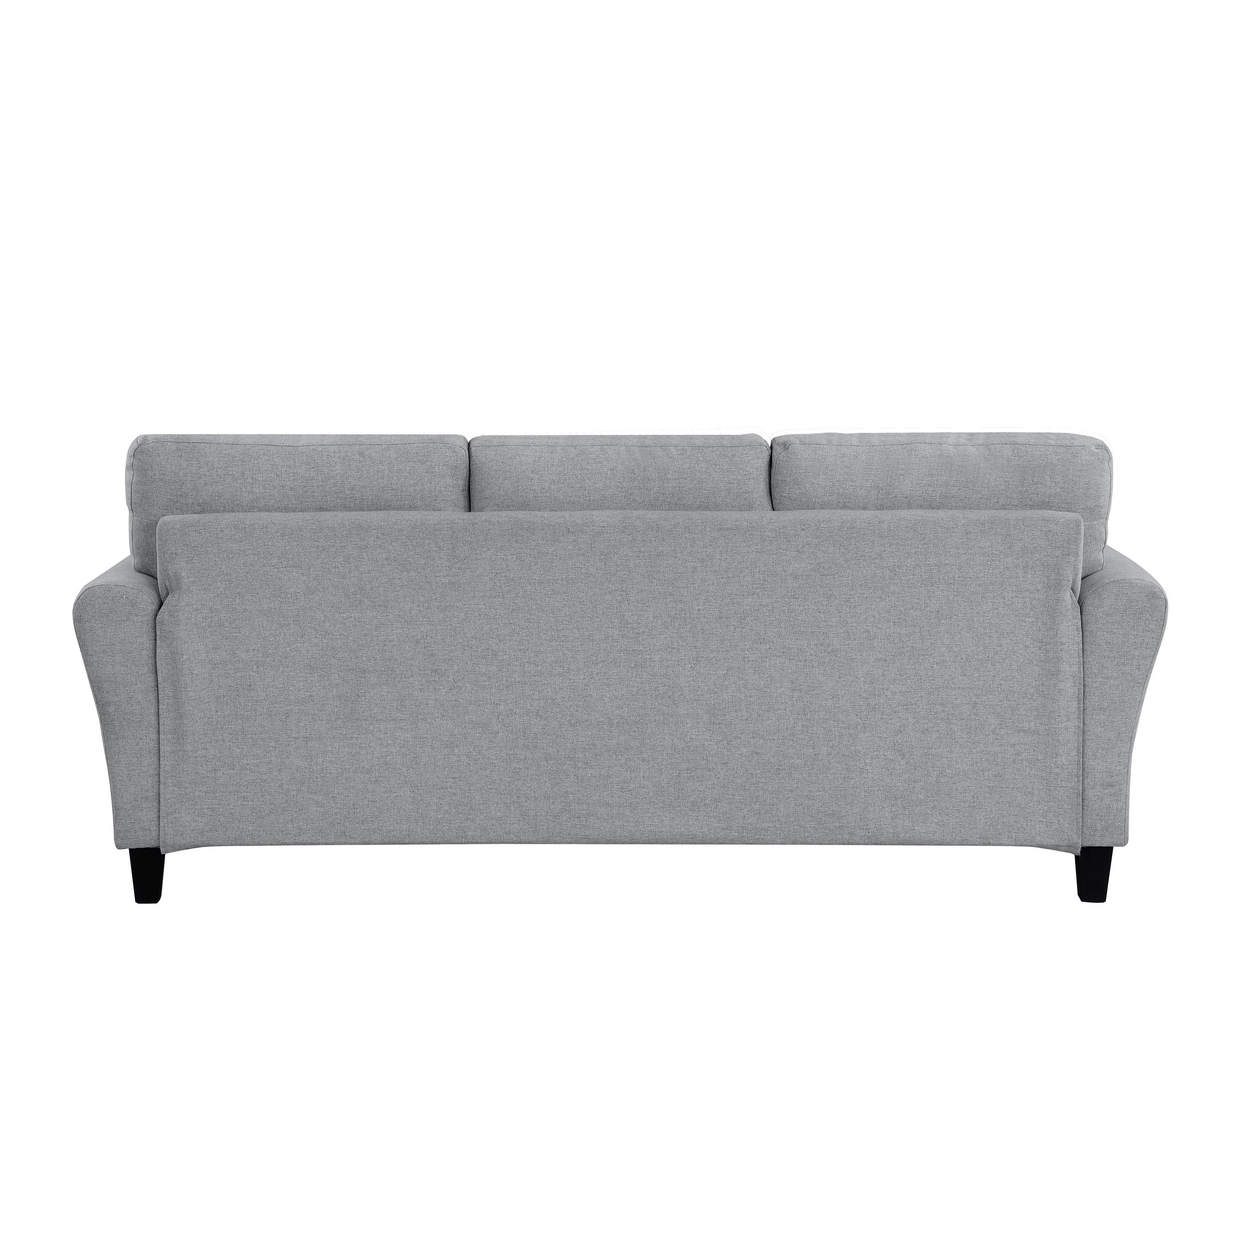 Engi 81 Inch Accent Sofa, Smooth Gray Polyester, Attached Back Cushion- Saltoro Sherpi